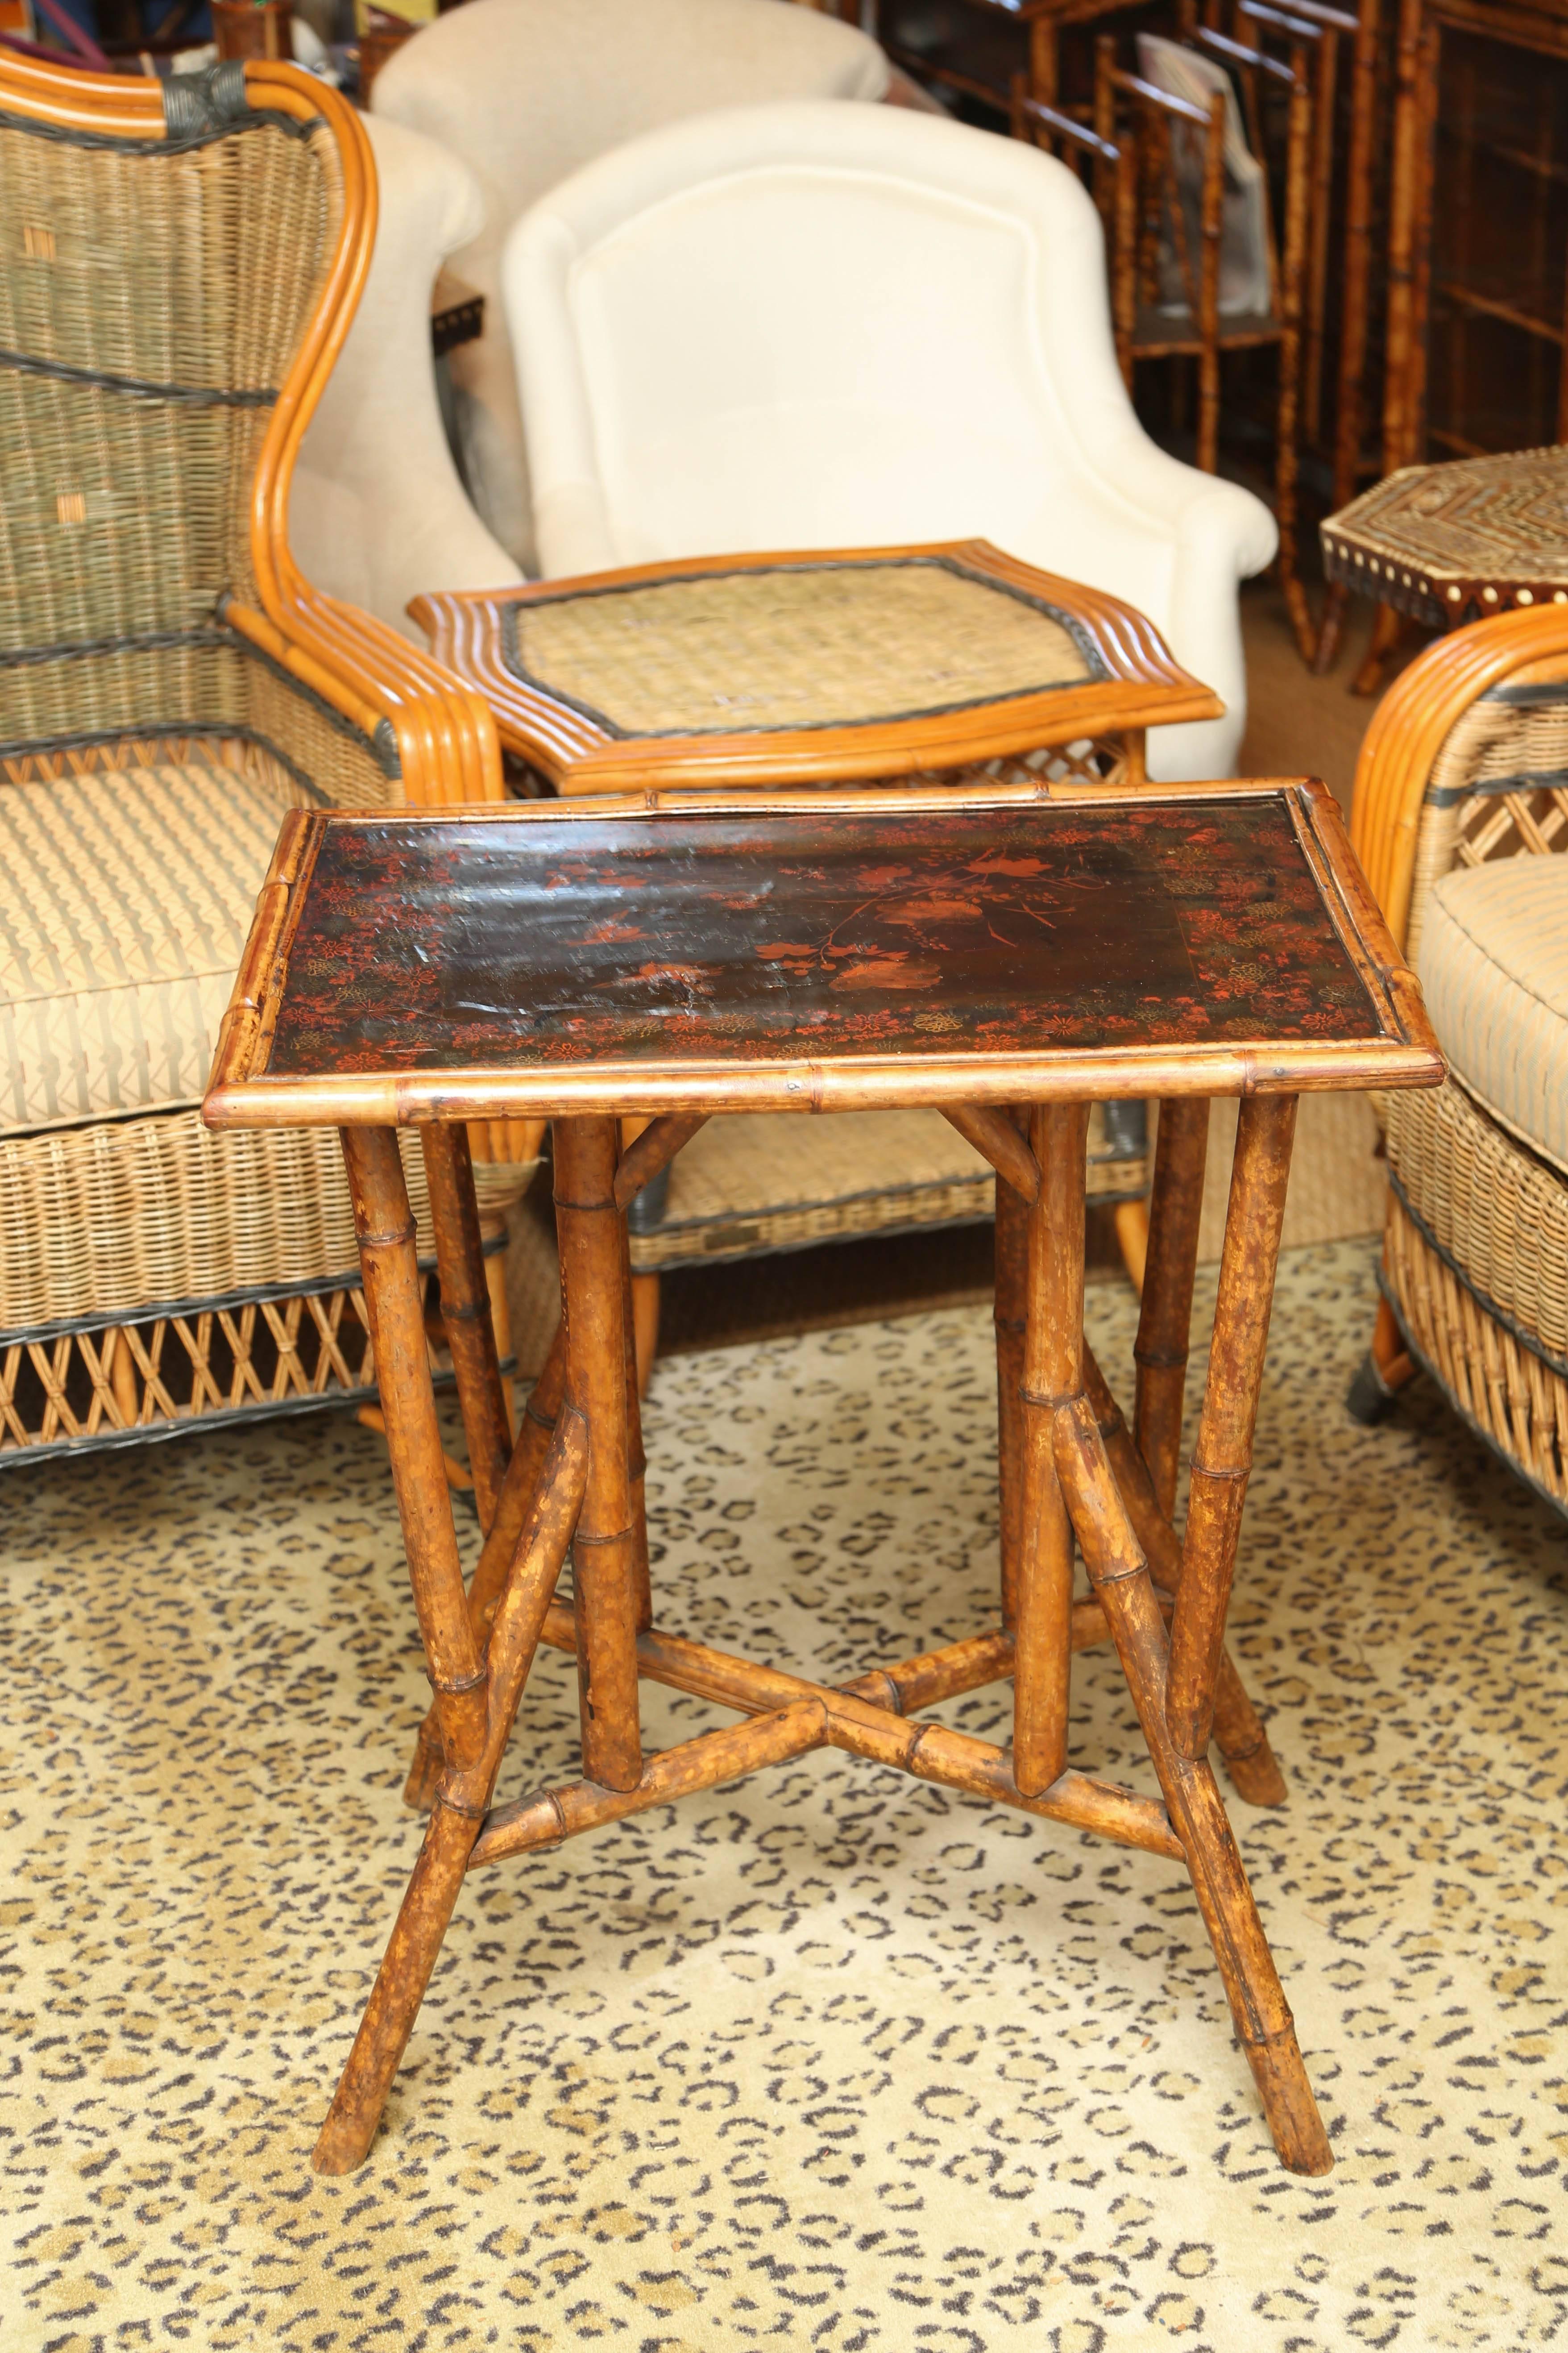 Superb 19th century English bamboo side table with japanning.